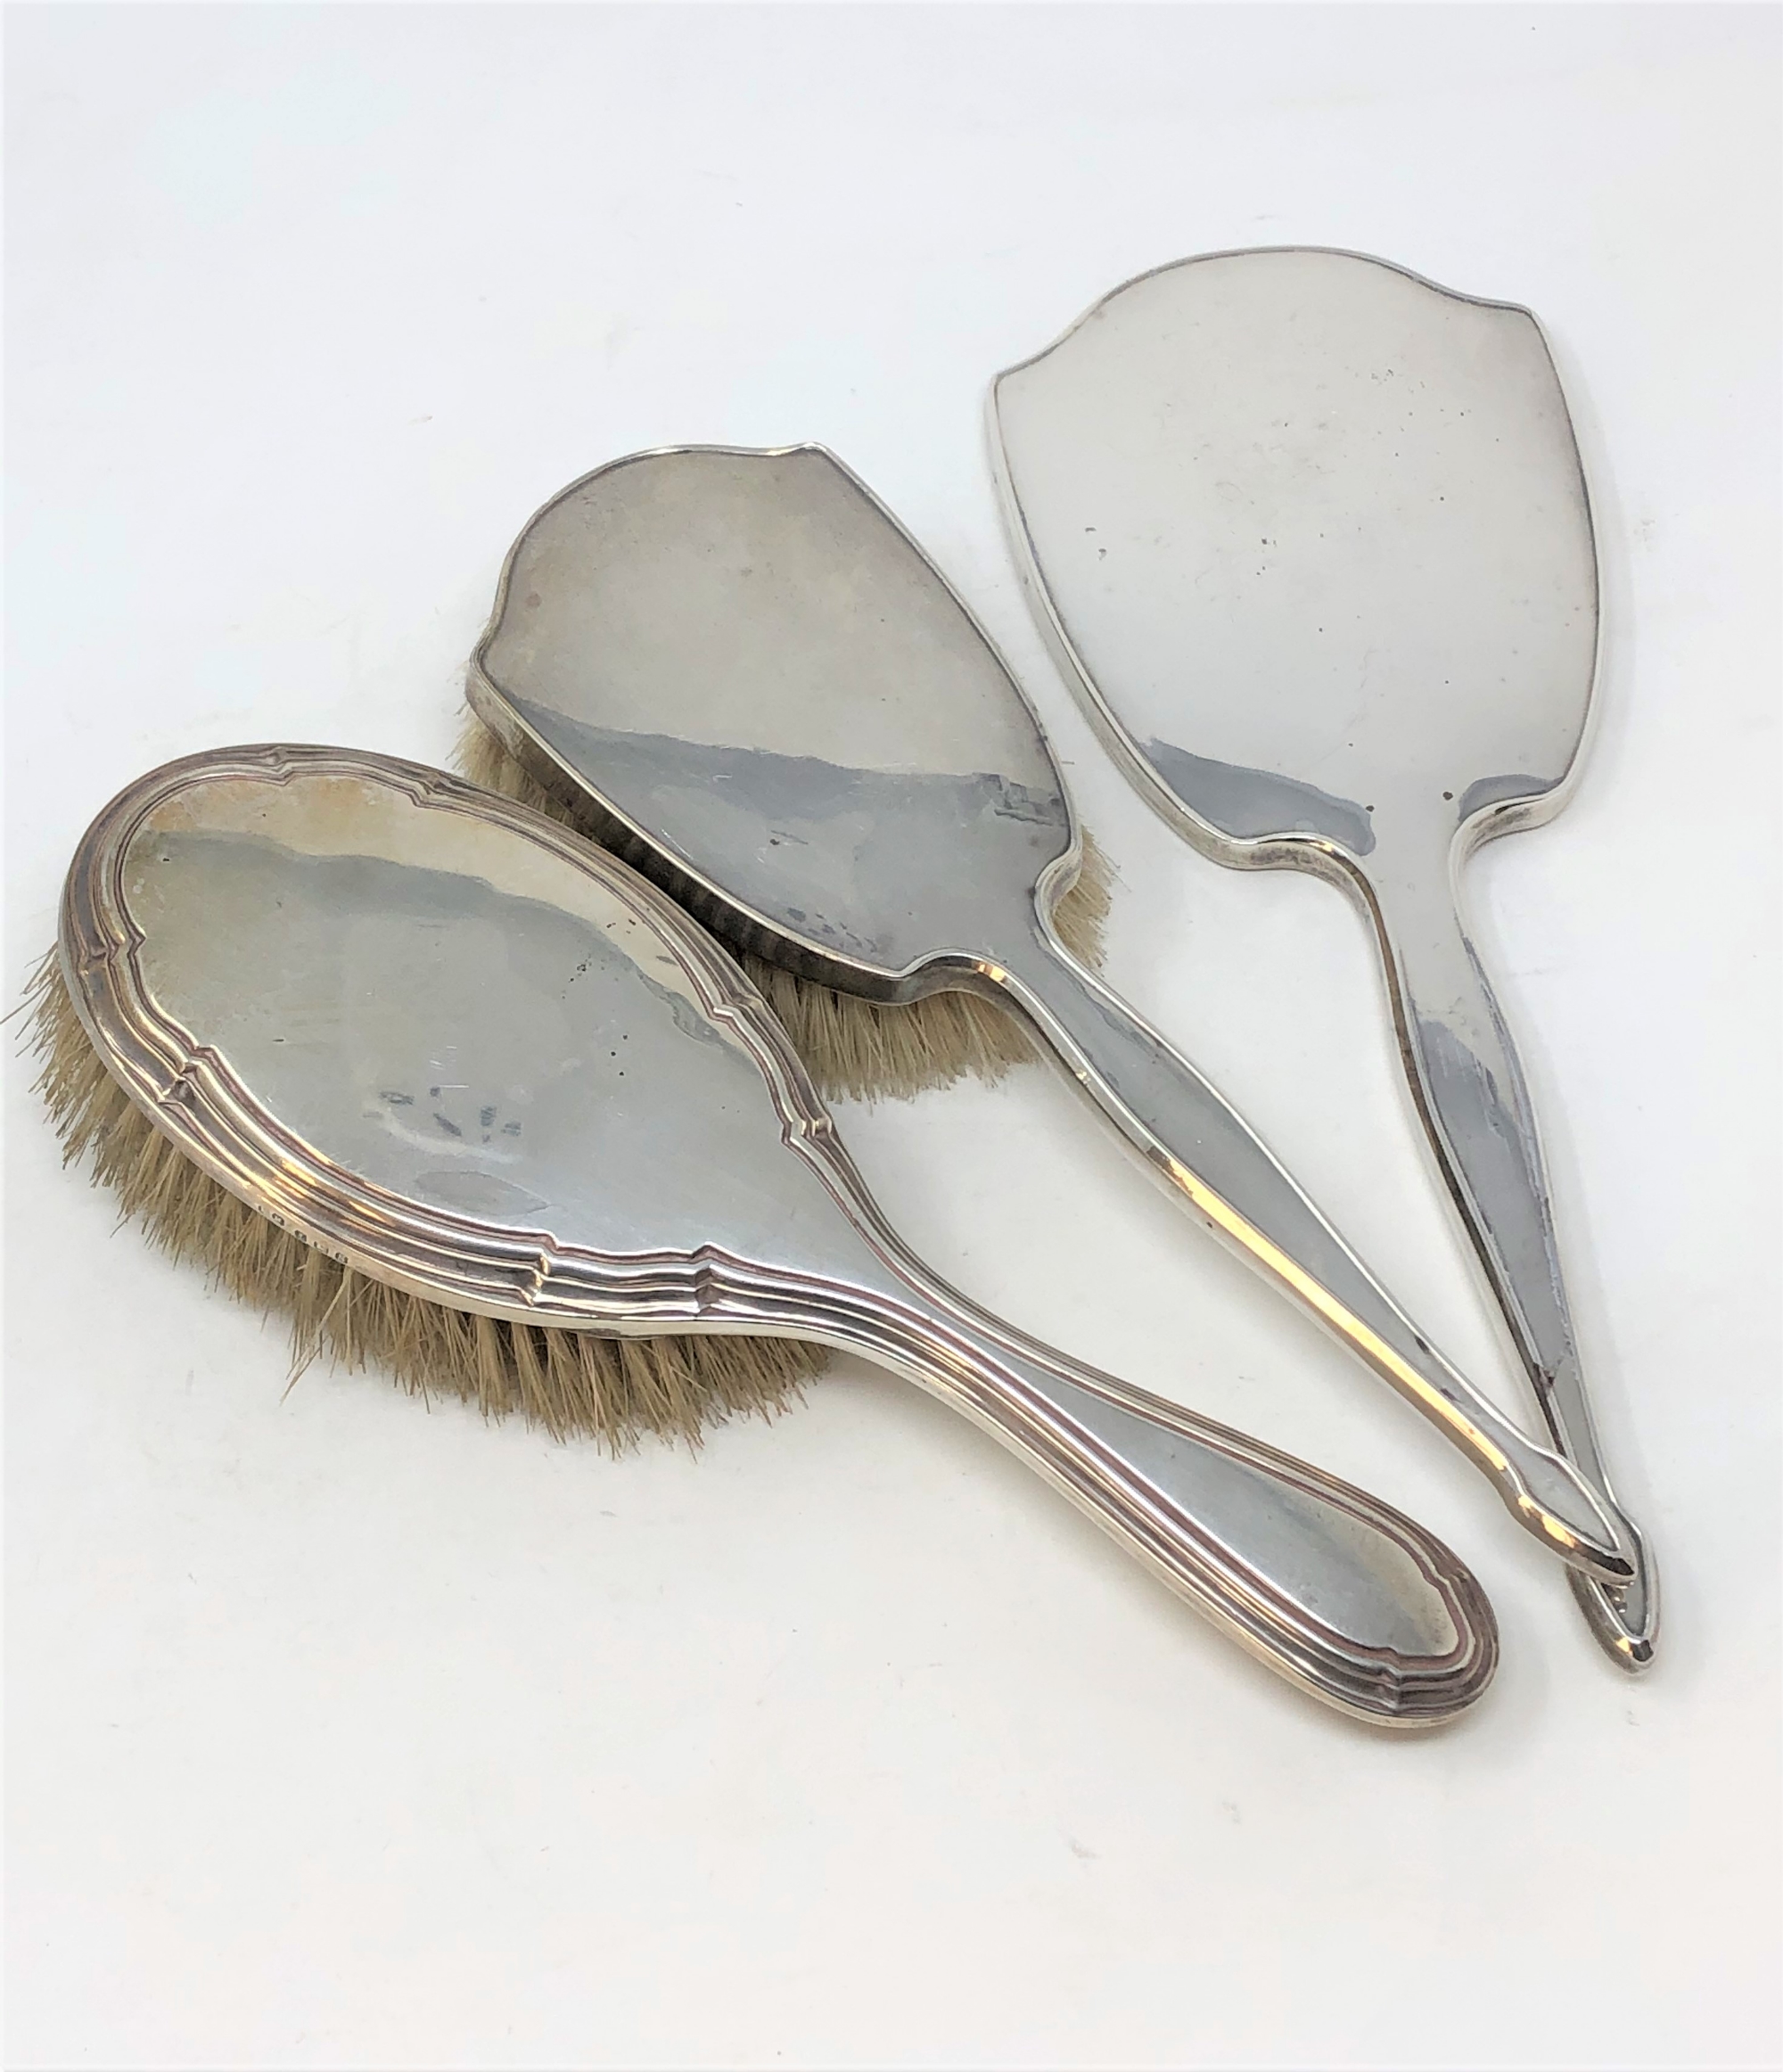 A silver hand mirror, matching brush and another non-matching silver brush.